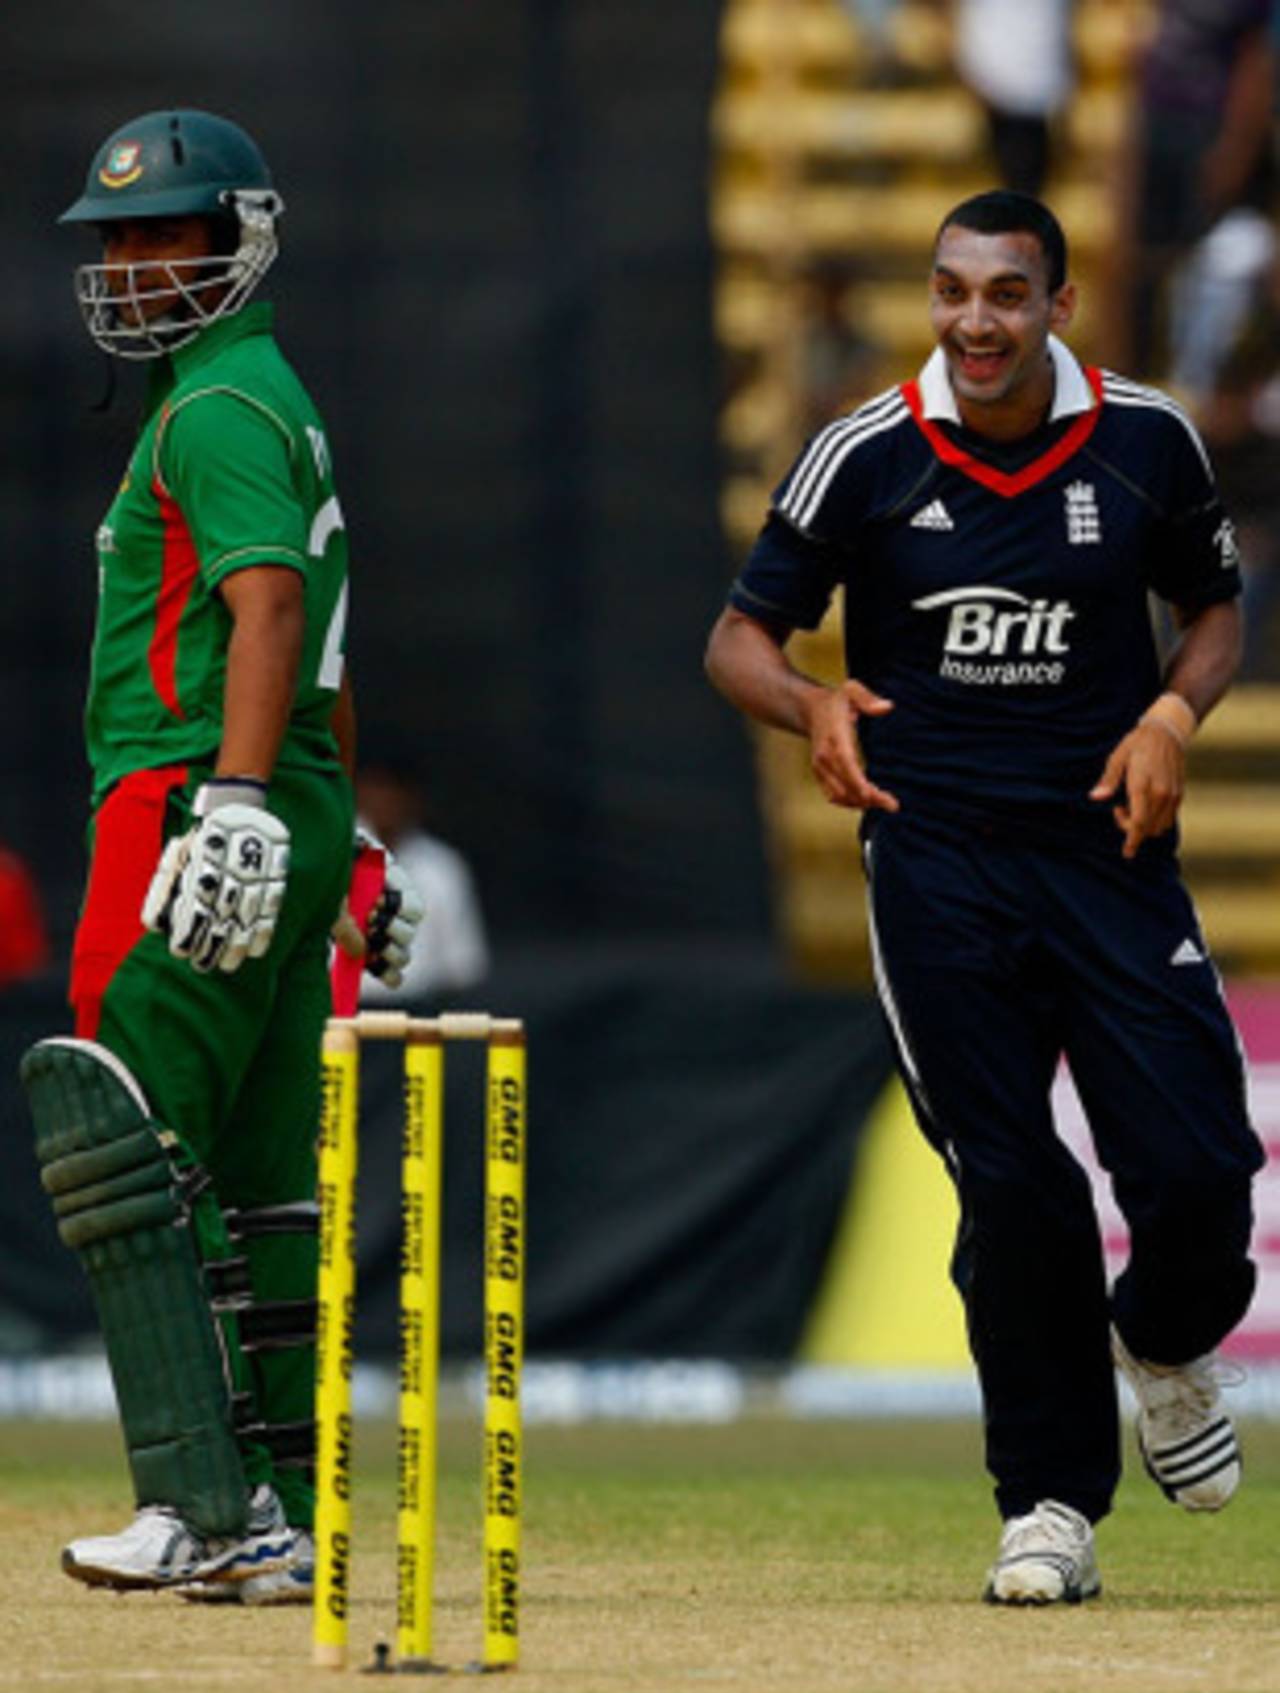 Ajmal Shahzad took a wicket with his third ball in ODI cricket, Bangladesh v England, 3rd ODI, Chittagong, March 5, 2010